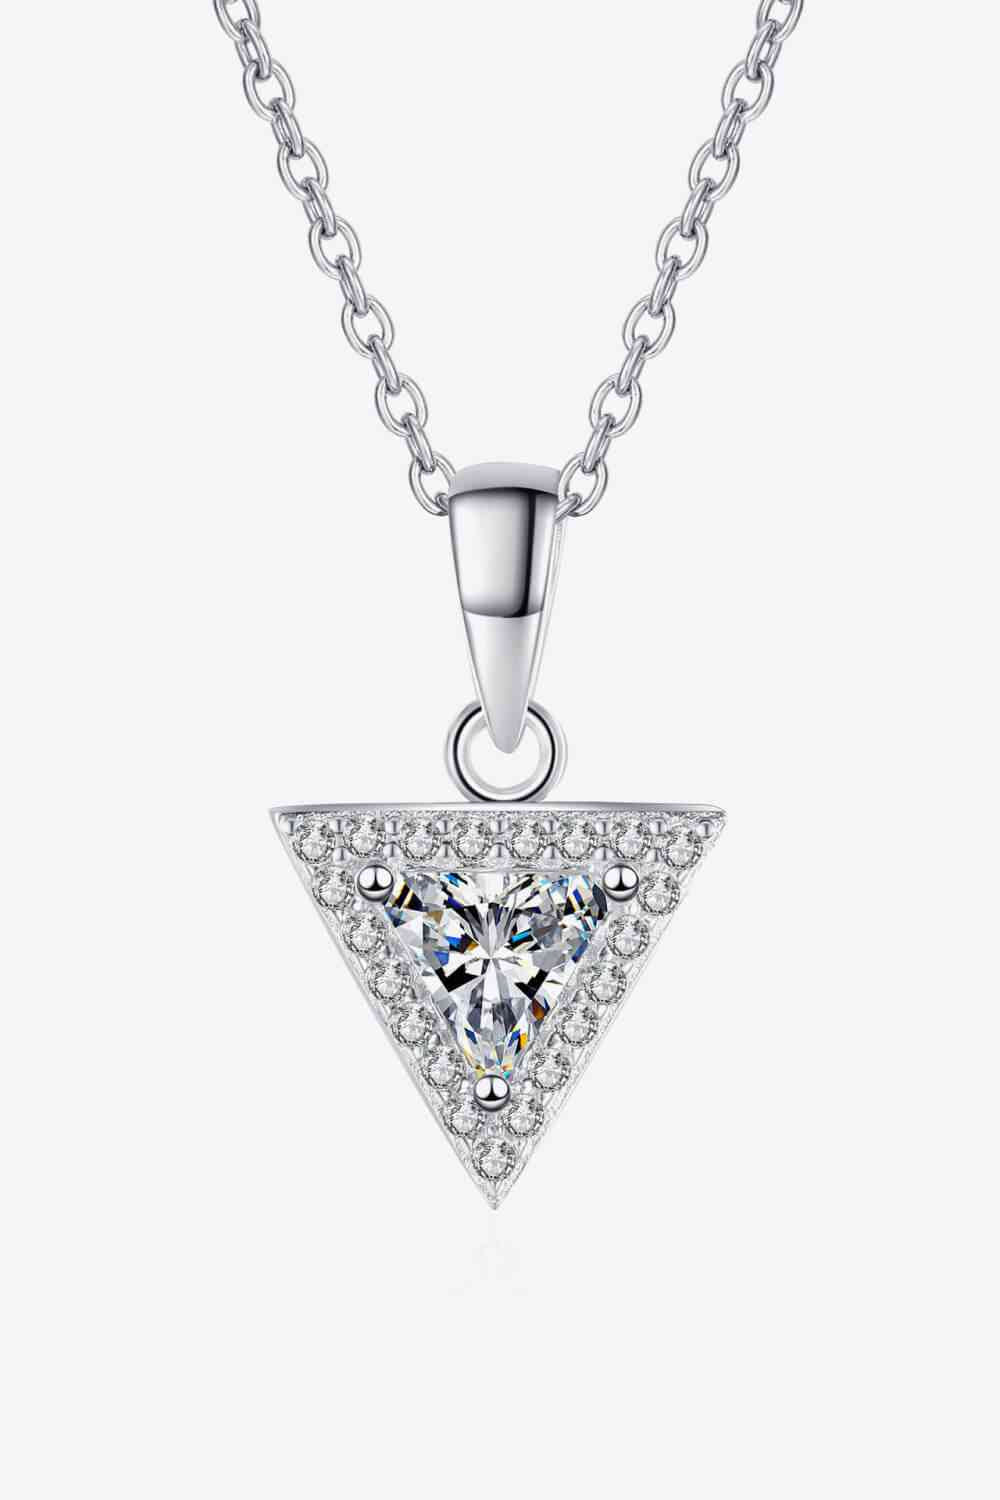 925 Sterling Silver Triangle Moissanite Pendant Necklace - lolaluxeshop